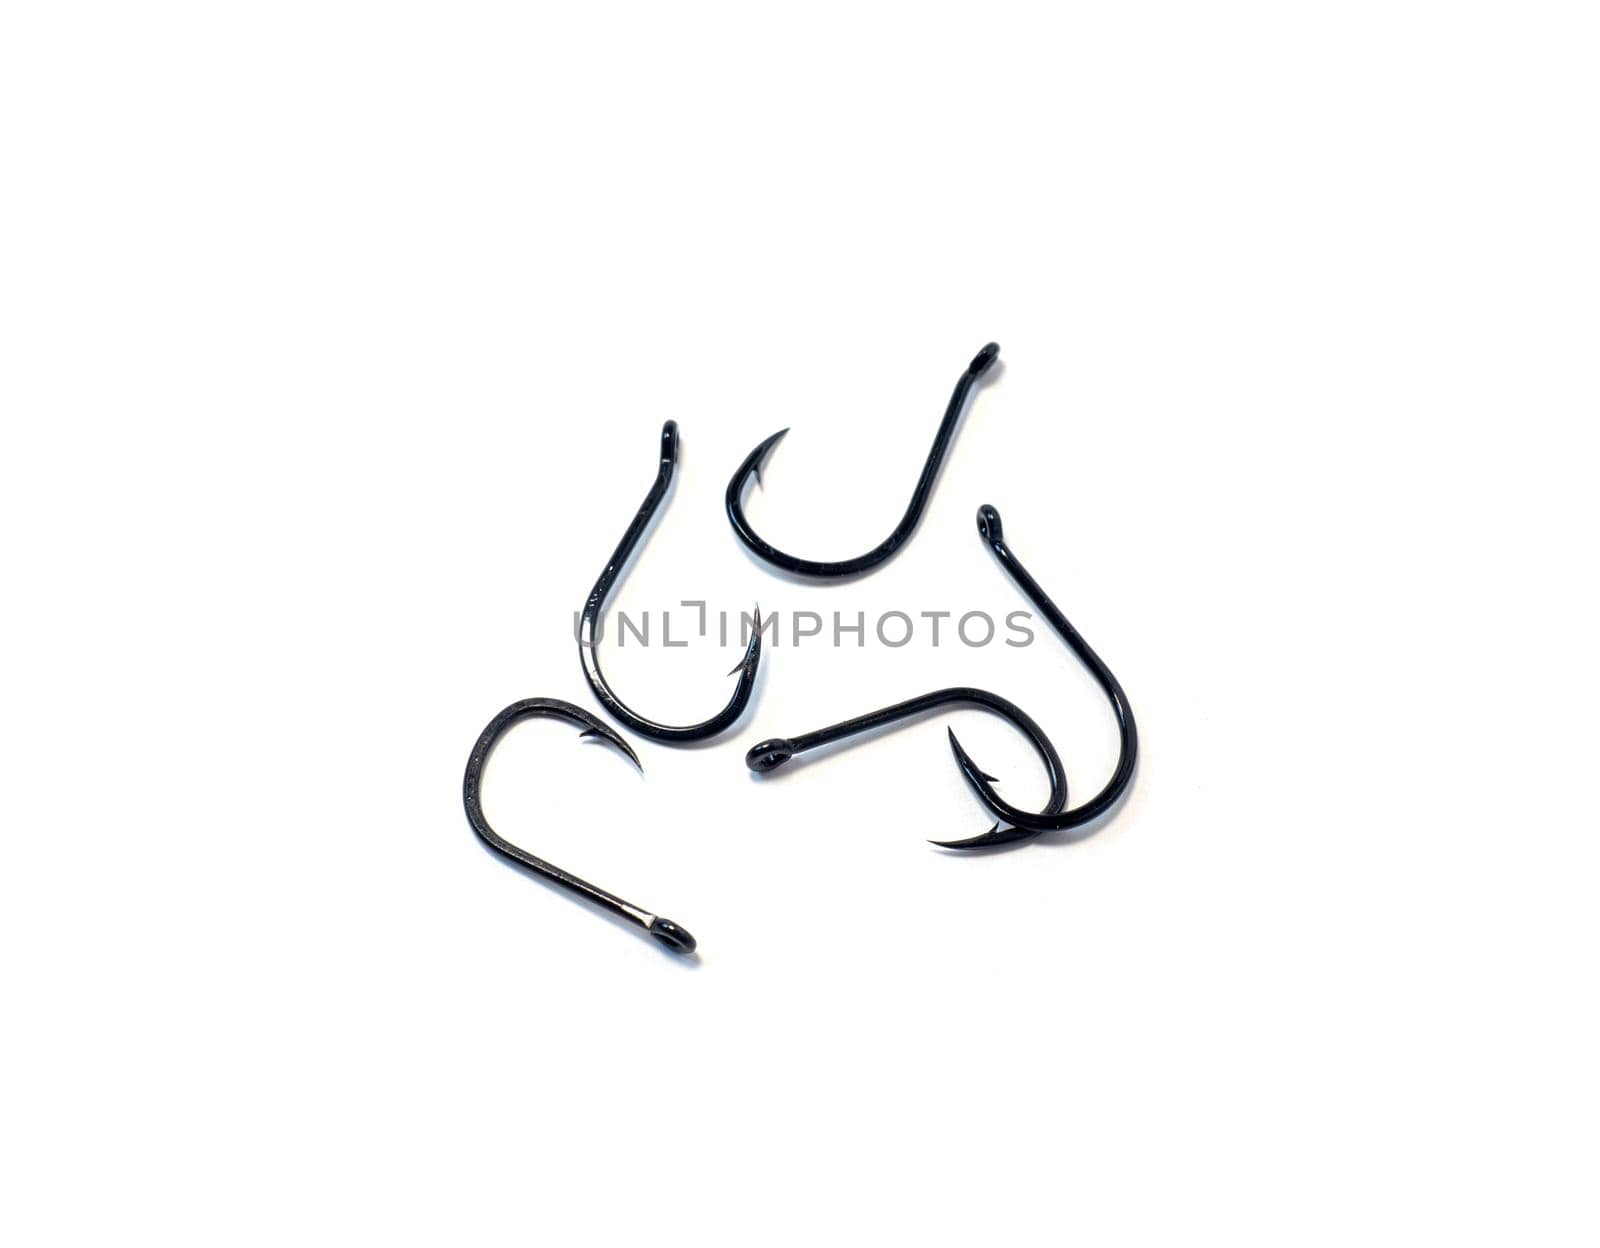 fish hooks for catching carp on a white background by Puludi